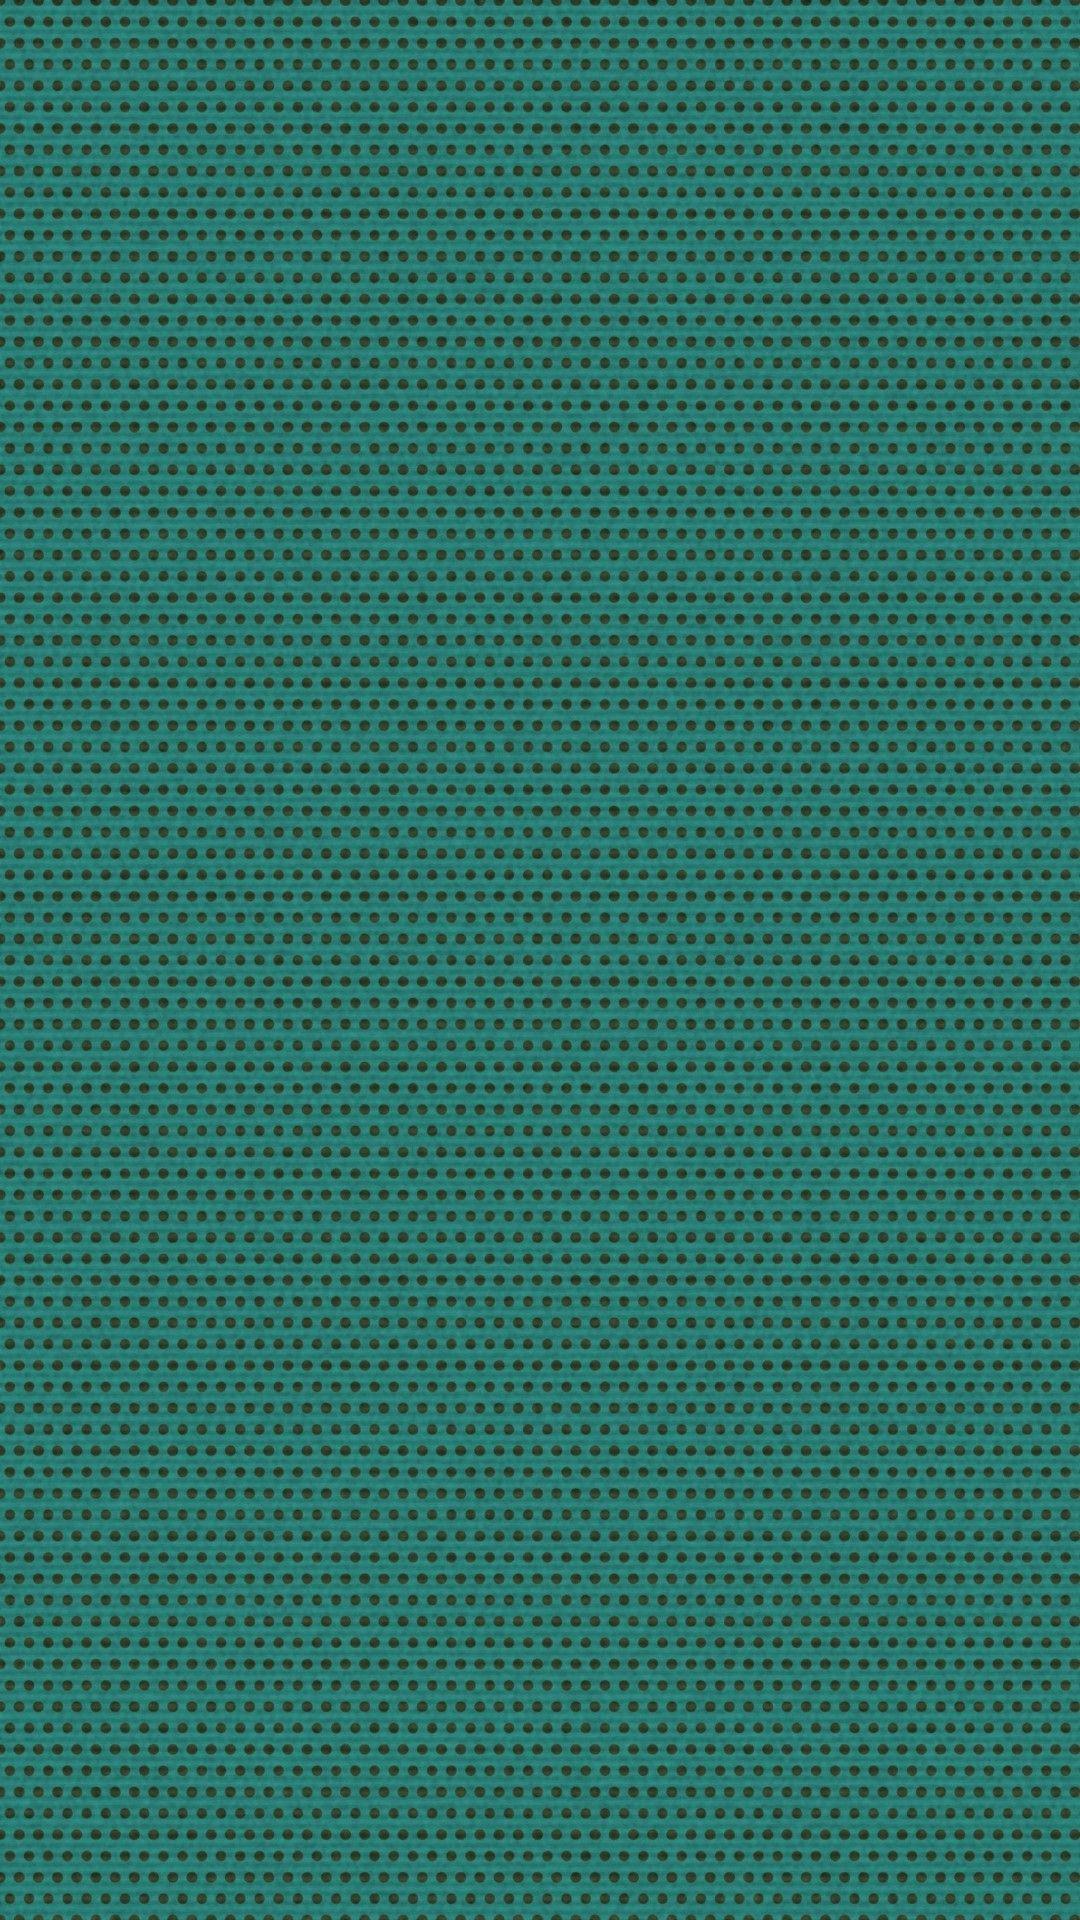 Green Iphone Wallpapers Top Free Green Iphone Backgrounds Wallpaperaccess